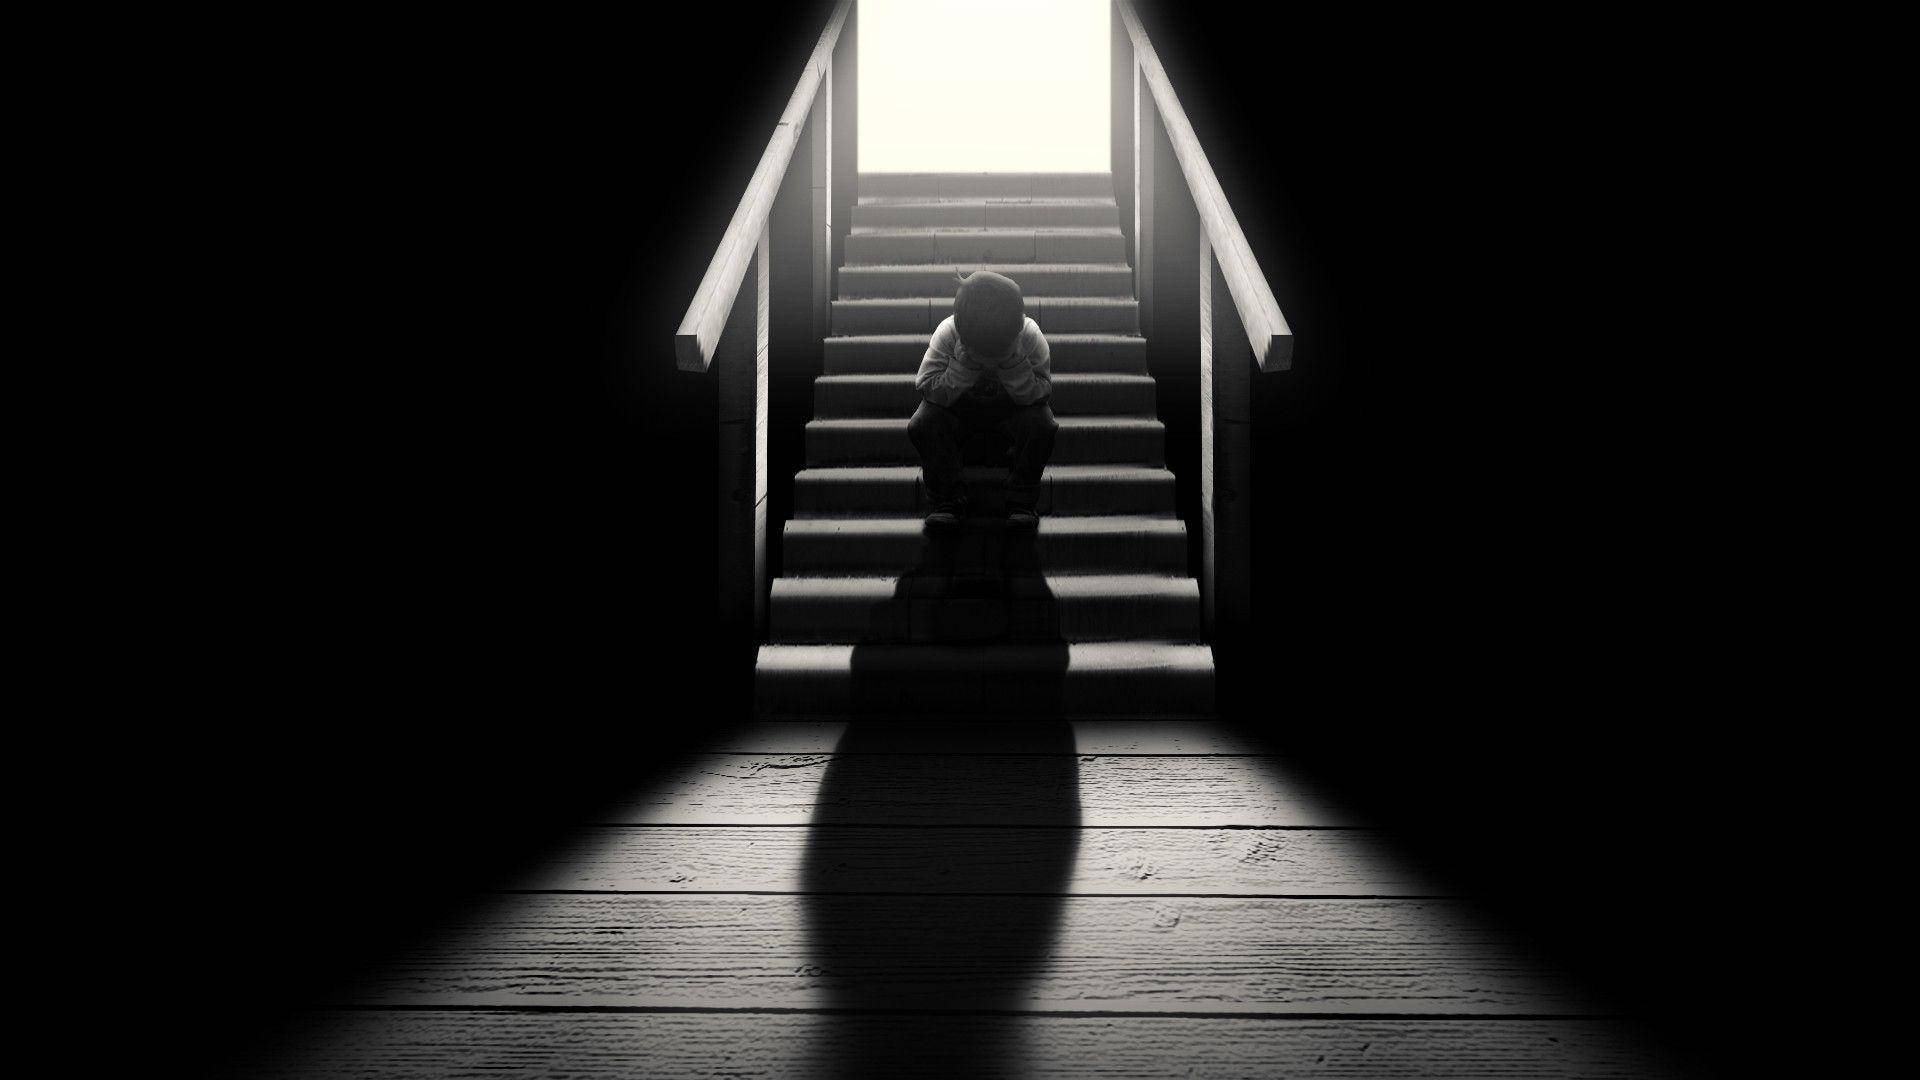 Dark Loneliness: A Solitary Figure on a Staircase Wallpaper